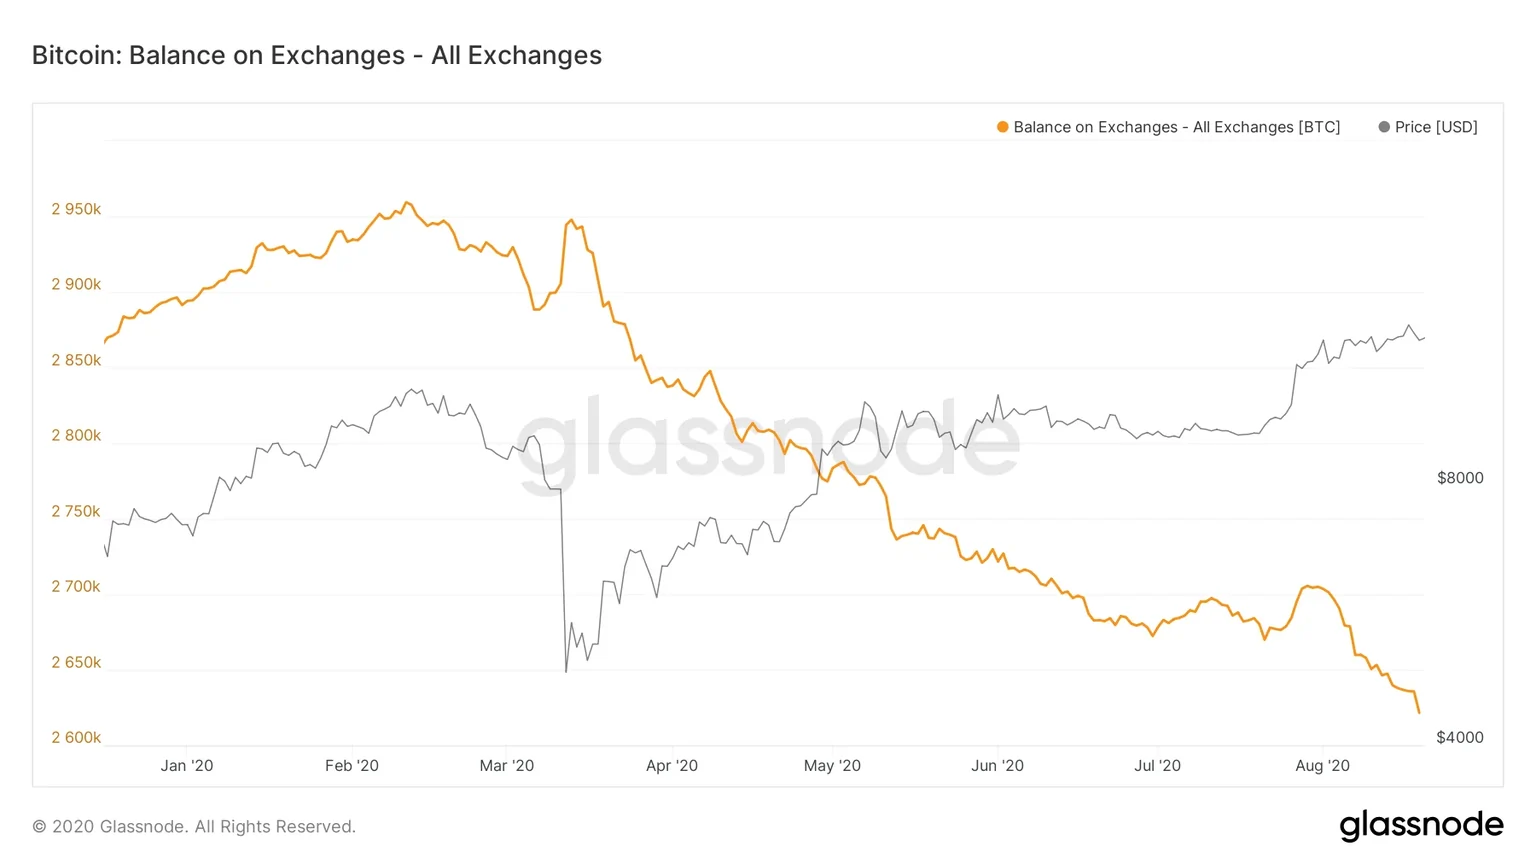 Bitcoin: Balance on Exchanges - All Exchanges